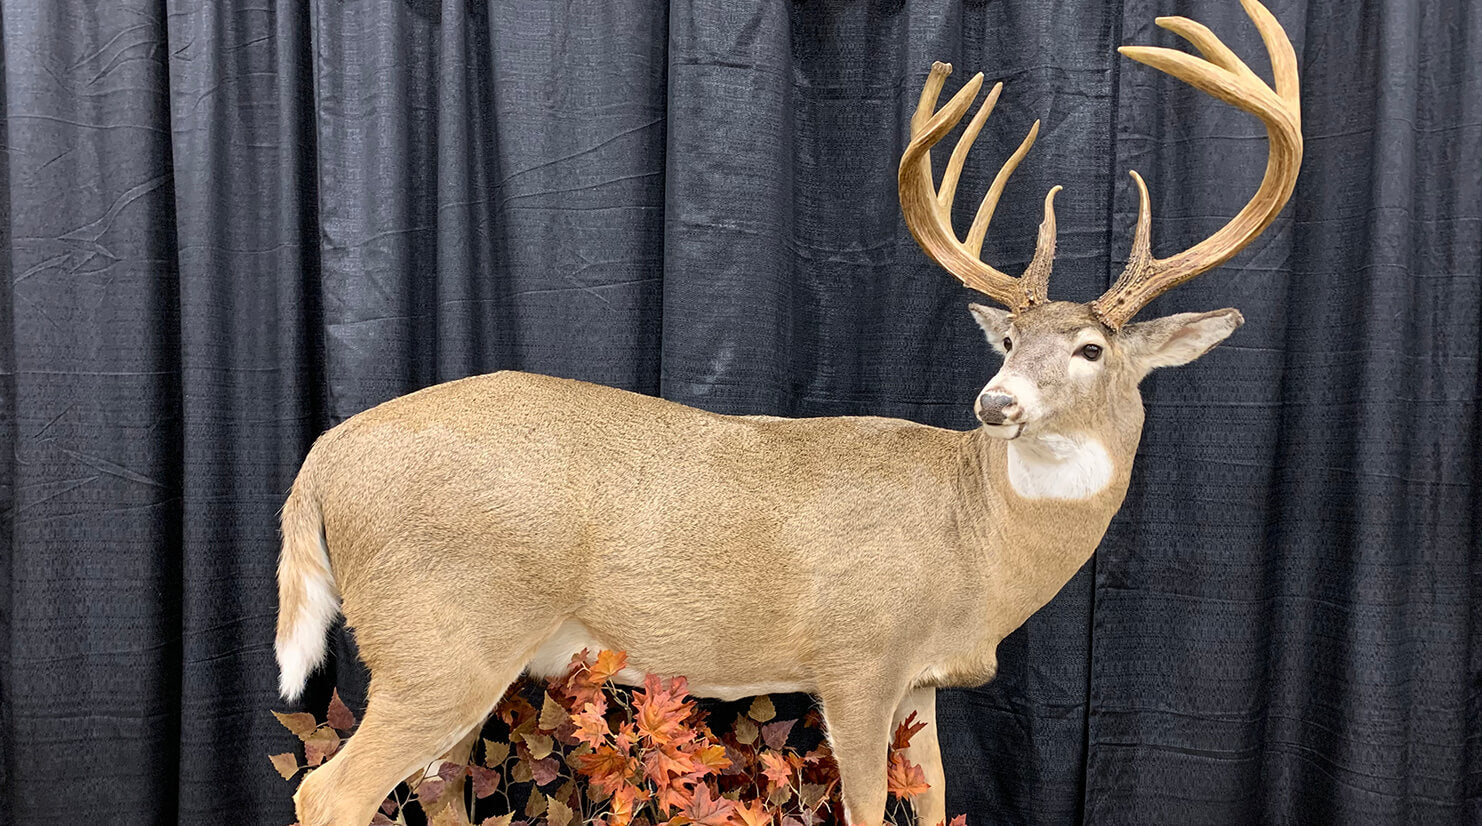 The Largest Typical Buck Ever Taken in the U.S.